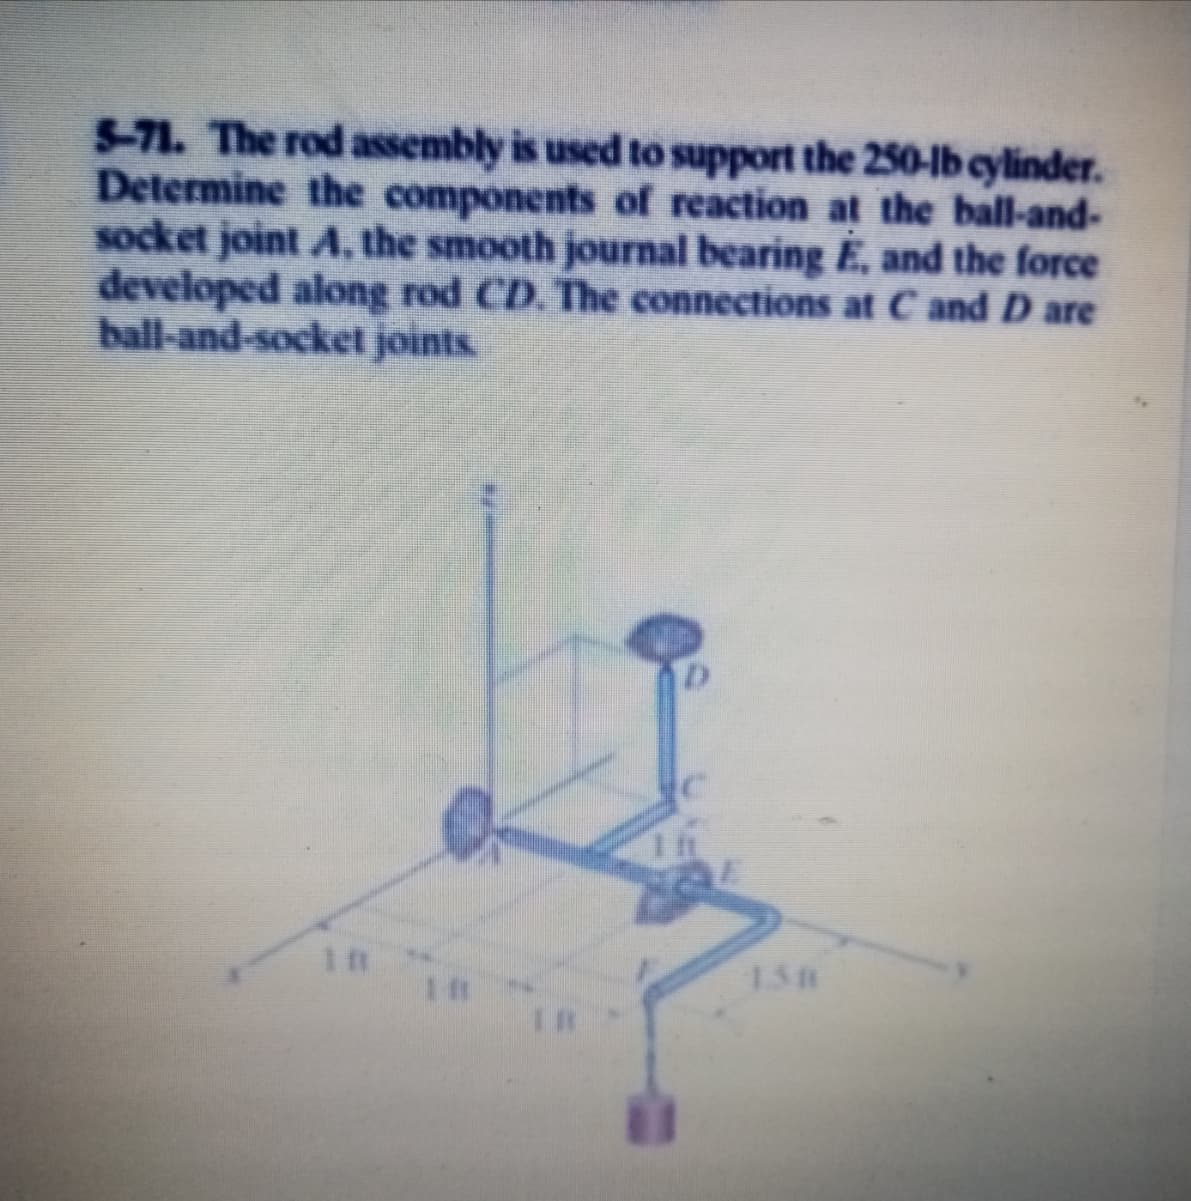 5-71. The rod assembly is used to support the 250-lb cylinder.
Determine the components of reaction at the ball-and-
socket joint A. the smooth journal bearing E, and the force
developed along rod CD. The connections at C and D are
ball-and-socket joints
